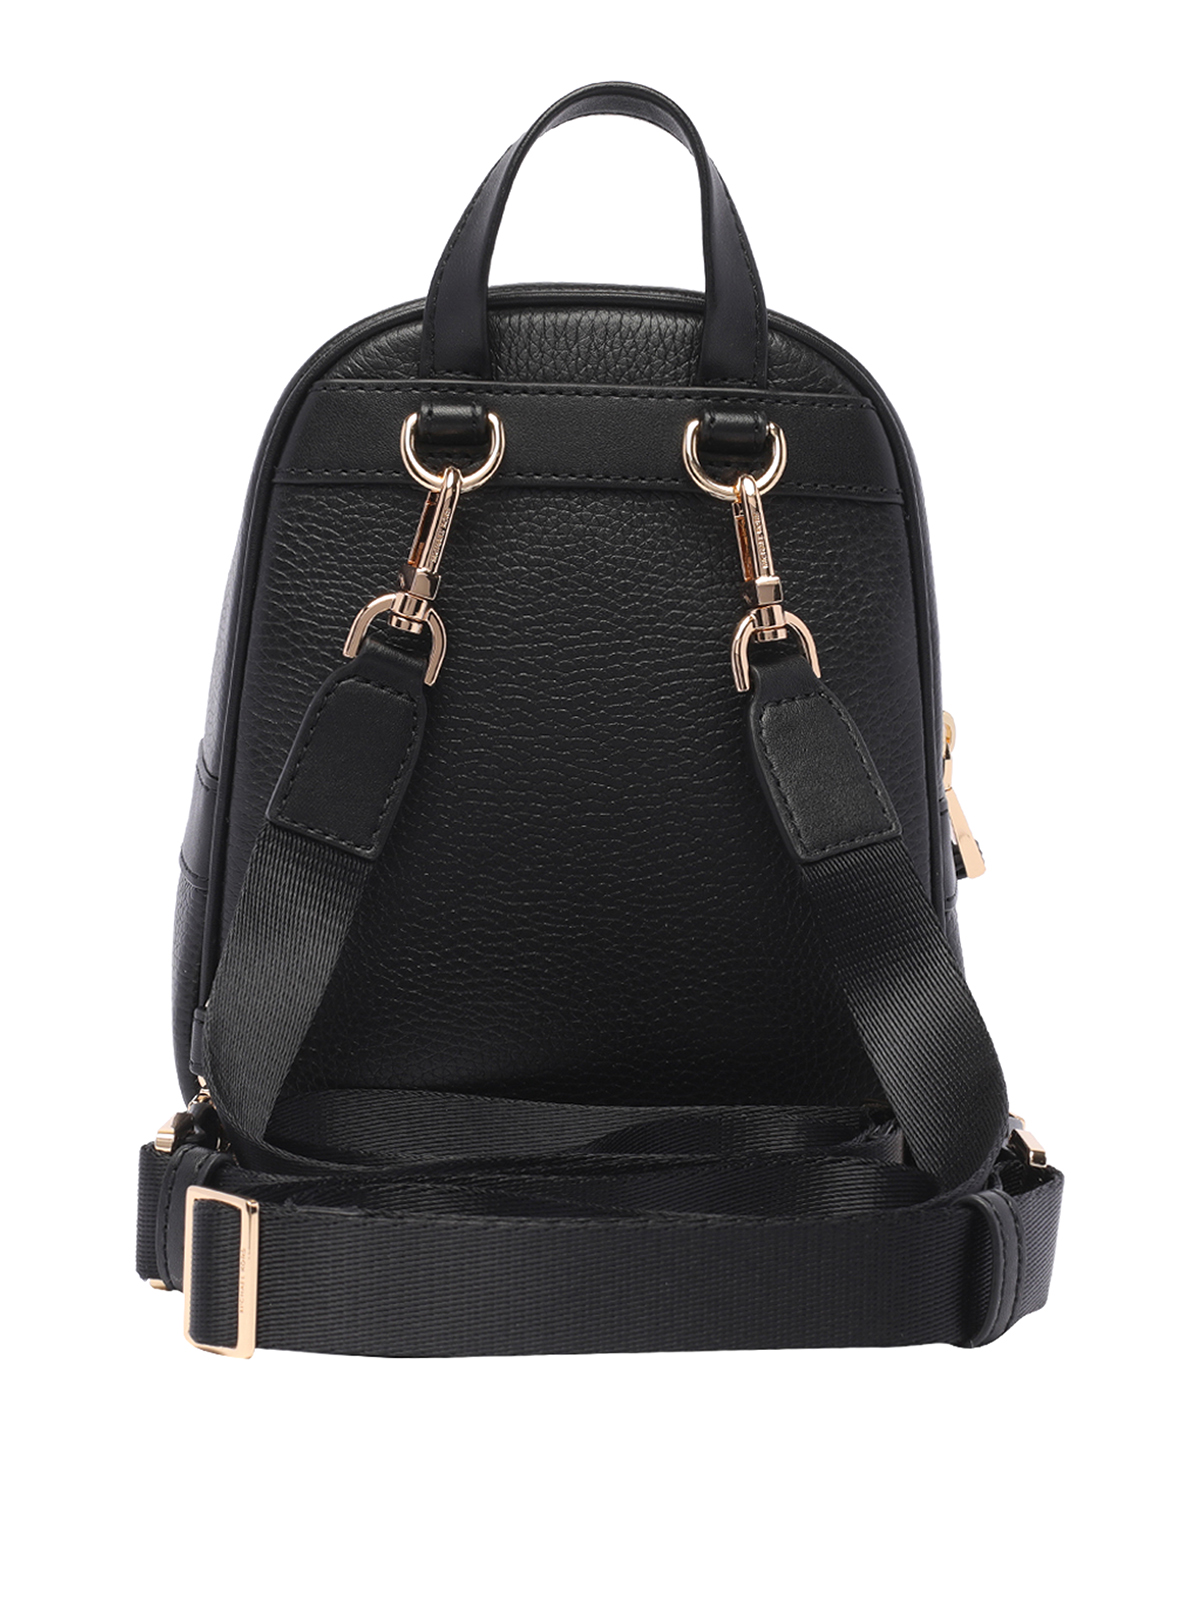 Korean Style PRINT MINI Backpack Purses Super Hot Casual Accessory For  Women, Available In Mixed Batch Orders From Wistrun, $13.02 | DHgate.Com